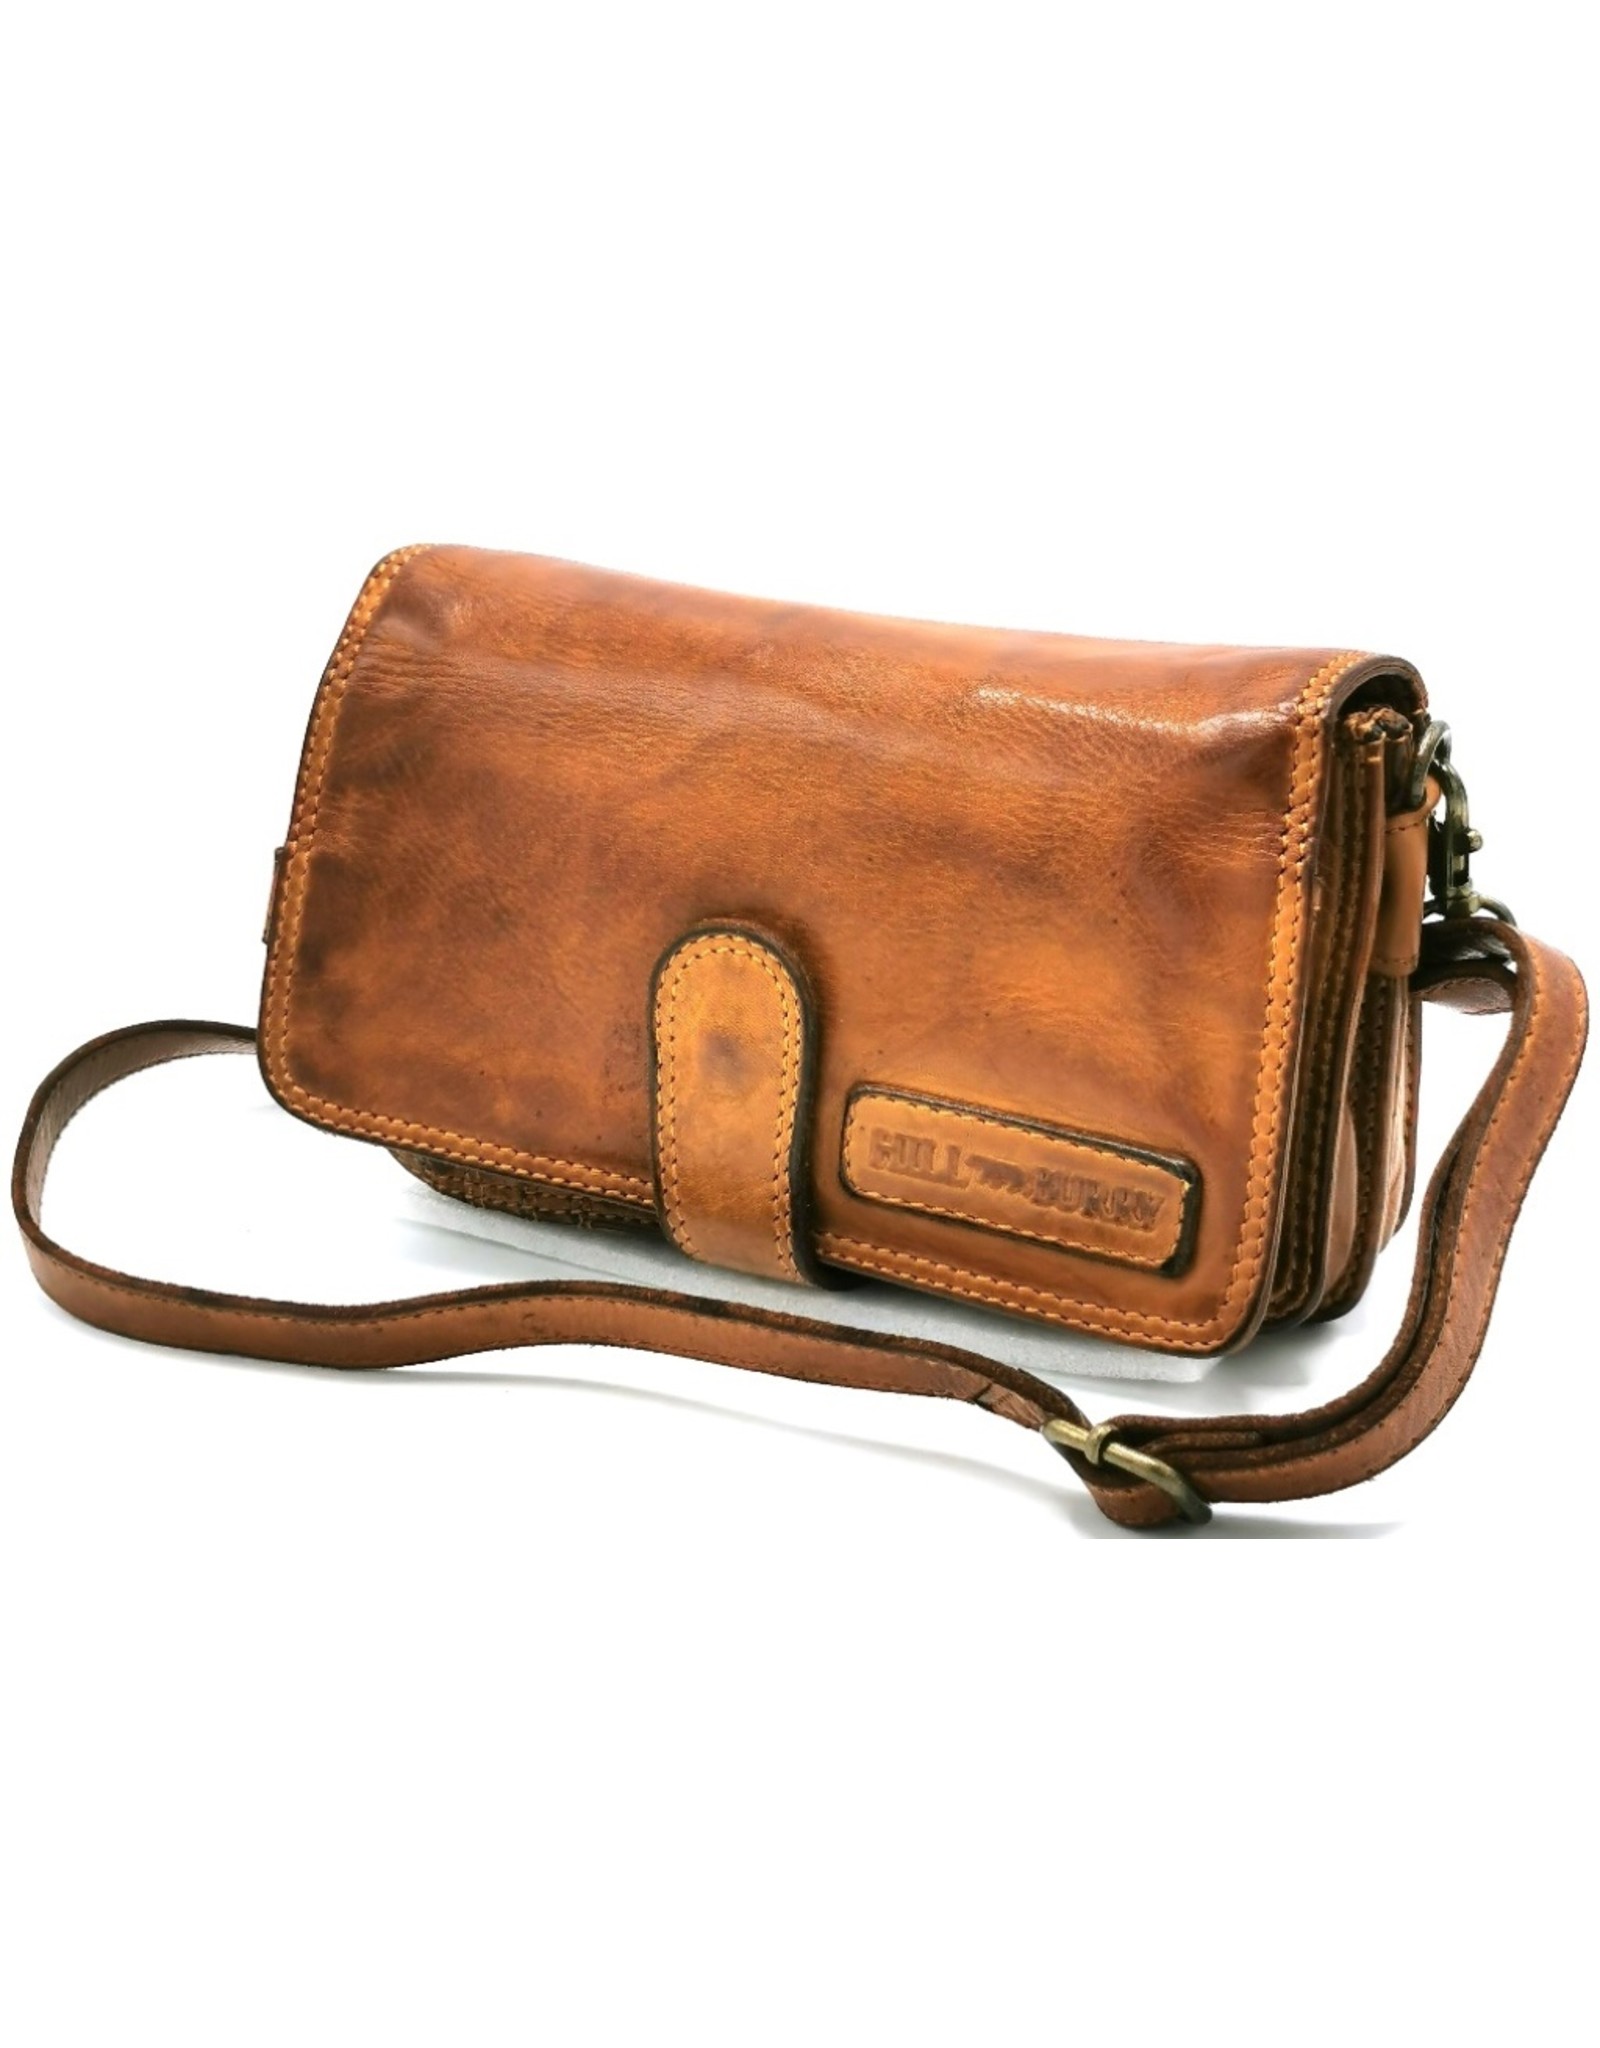 HillBurry Leather Festival bags, waist bags and belt bags - HillBurry Shoulder Bag-Wallet-Phone holder washed leather